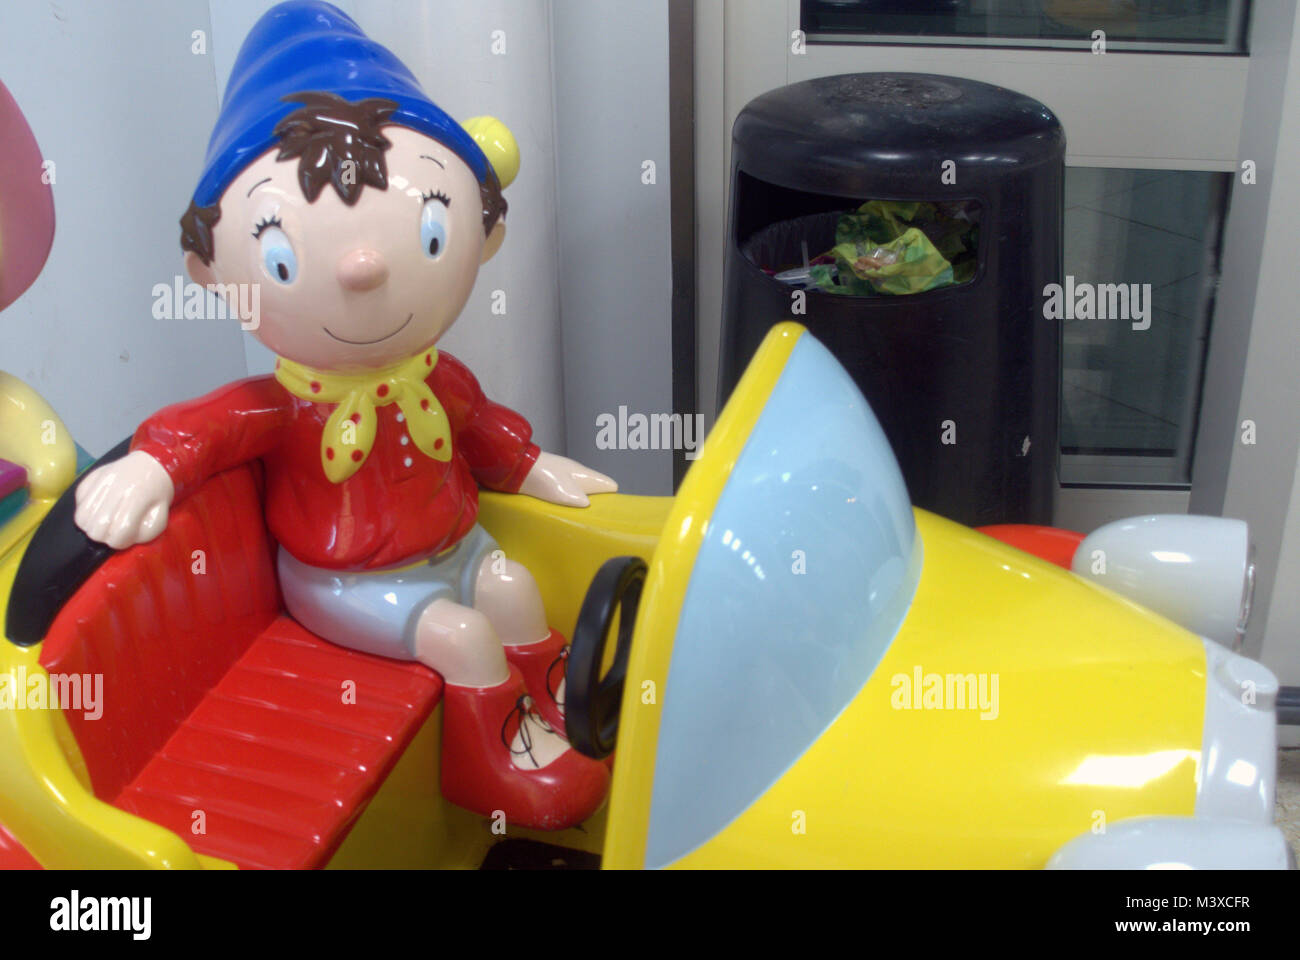 Noddy literary character by Enid Blyton in his little yellow taxi with his blue hat and red clothes Stock Photo